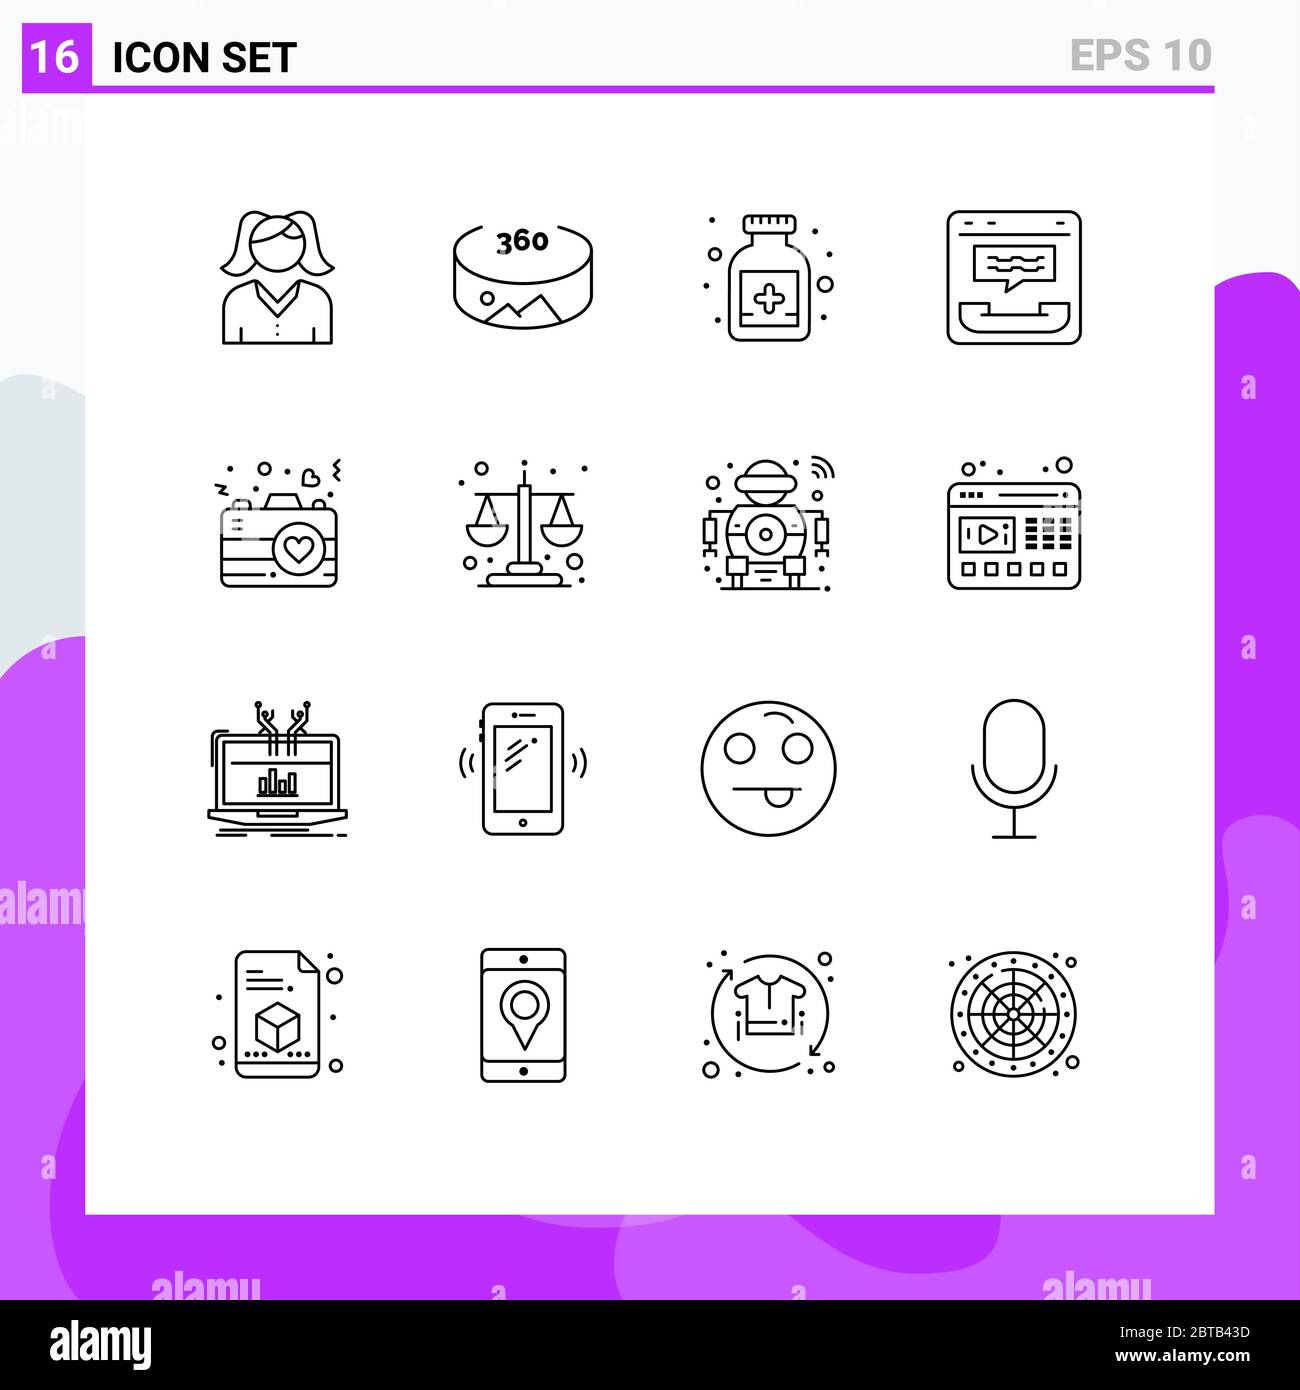 User Interface Pack of 16 Basic Outlines of balance, love, call, heart, help Editable Vector Design Elements Stock Vector